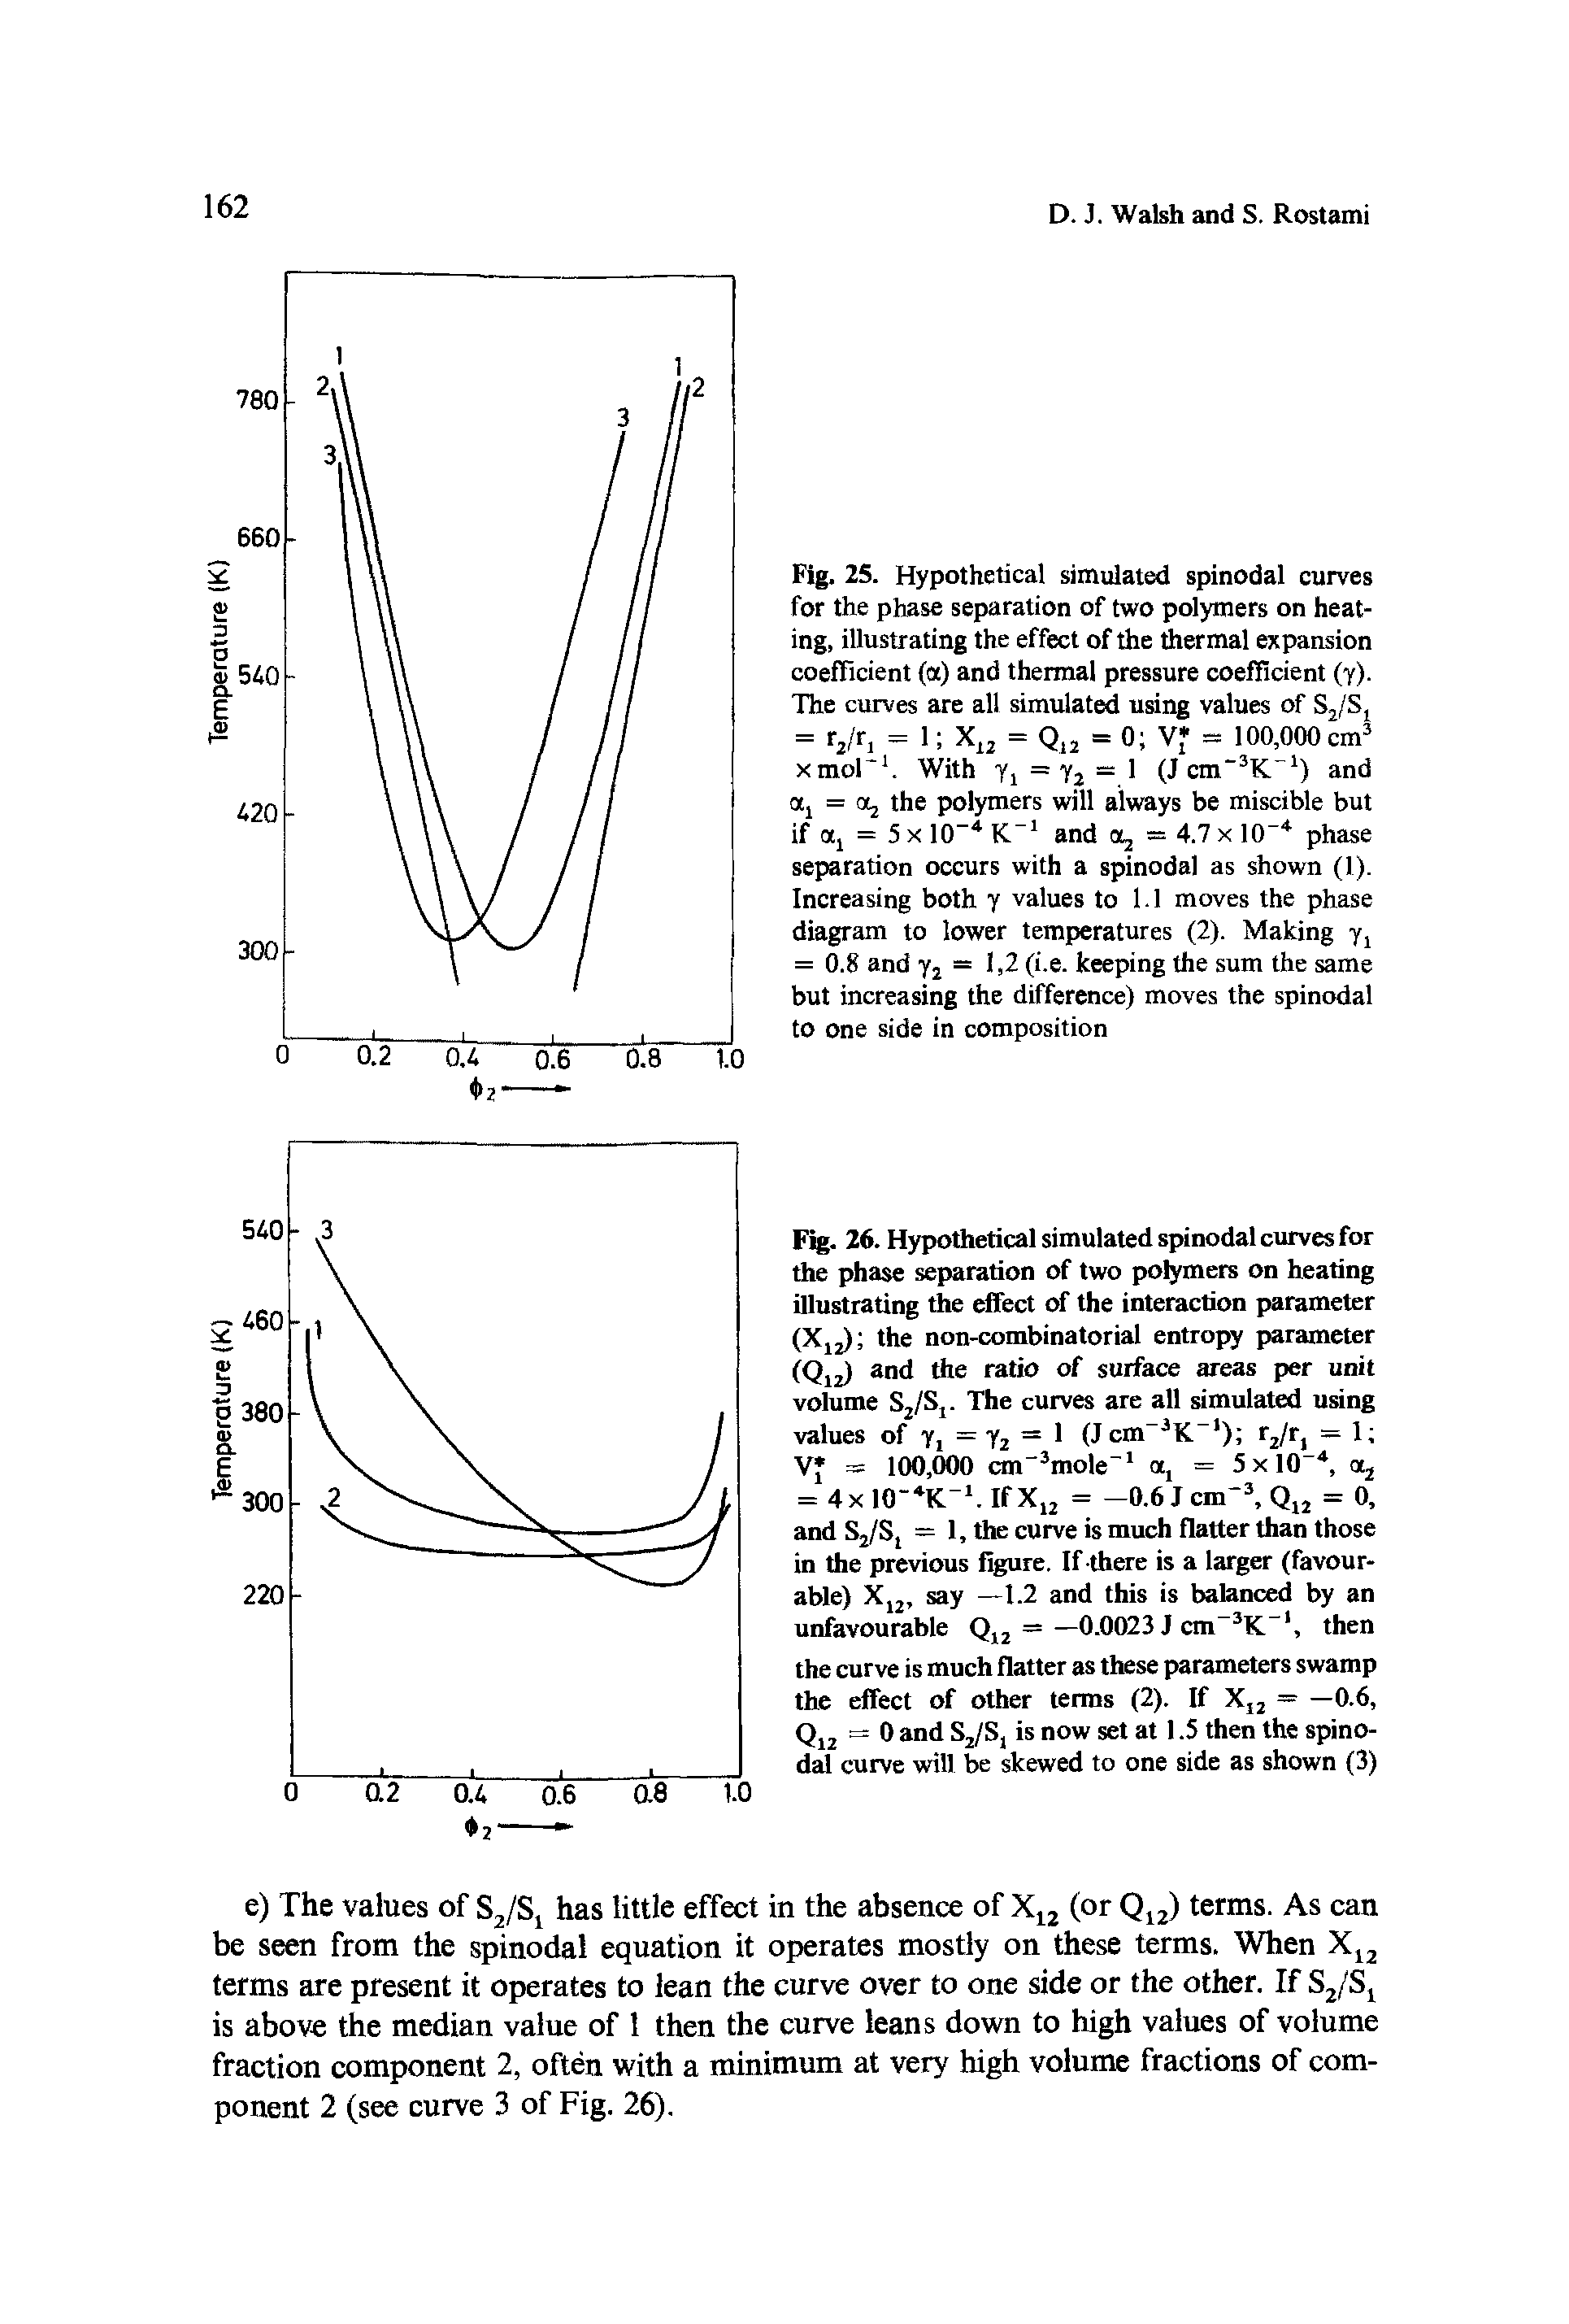 Fig. 25. Hypothetical simulated spinodal curves for the phase separation of two polymers on heating, illustrating the effect of the thermal expansion coefficient (a) and thermal pressure coefficient (y). The curves are all simulated using values of S2/St = r2/r, = 1 Xl2 = Q12 = 0 V = 100,000 cm3 xmor1. With Yj = y2 = 1 (J cm 3K-1) and oij = otj the polymers will always be miscible but if oij = 5 x 10-4 K 1 and a, = 4.7 x 10-4 phase separation occurs with a spinodal as shown (1). Increasing both y values to 1.1 moves the phase diagram to lower temperatures (2). Making y2 = 0.8 and y2 = 1,2 (i.e. keeping the sum the same but increasing the difference) moves the spinodal to one side in composition...